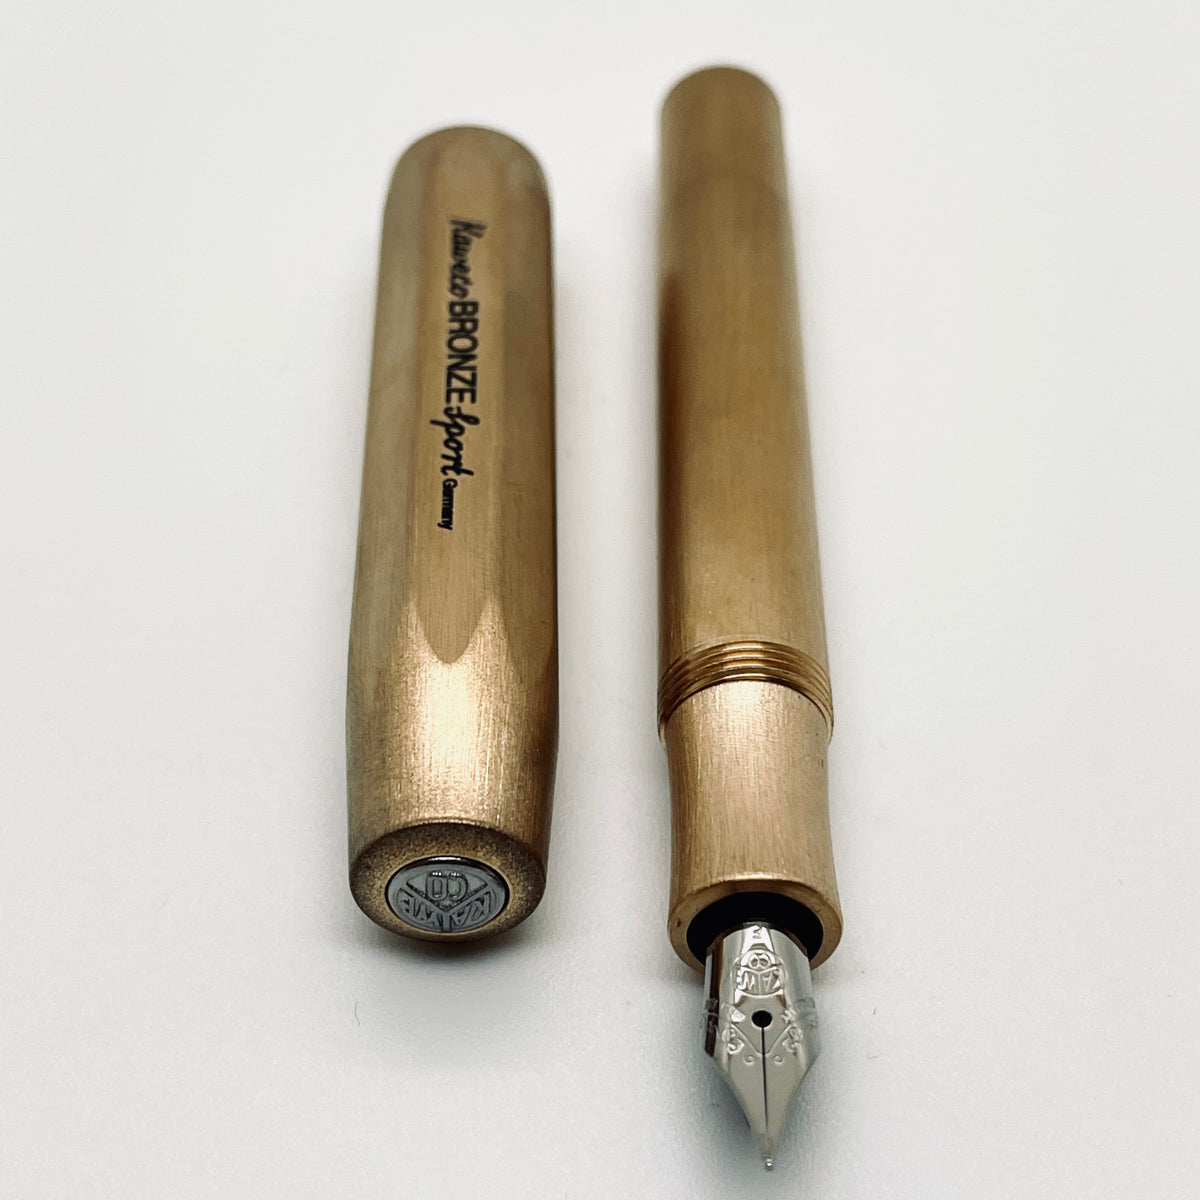 The new Bronze Kaweco Sport is an excellent edition to my Brass